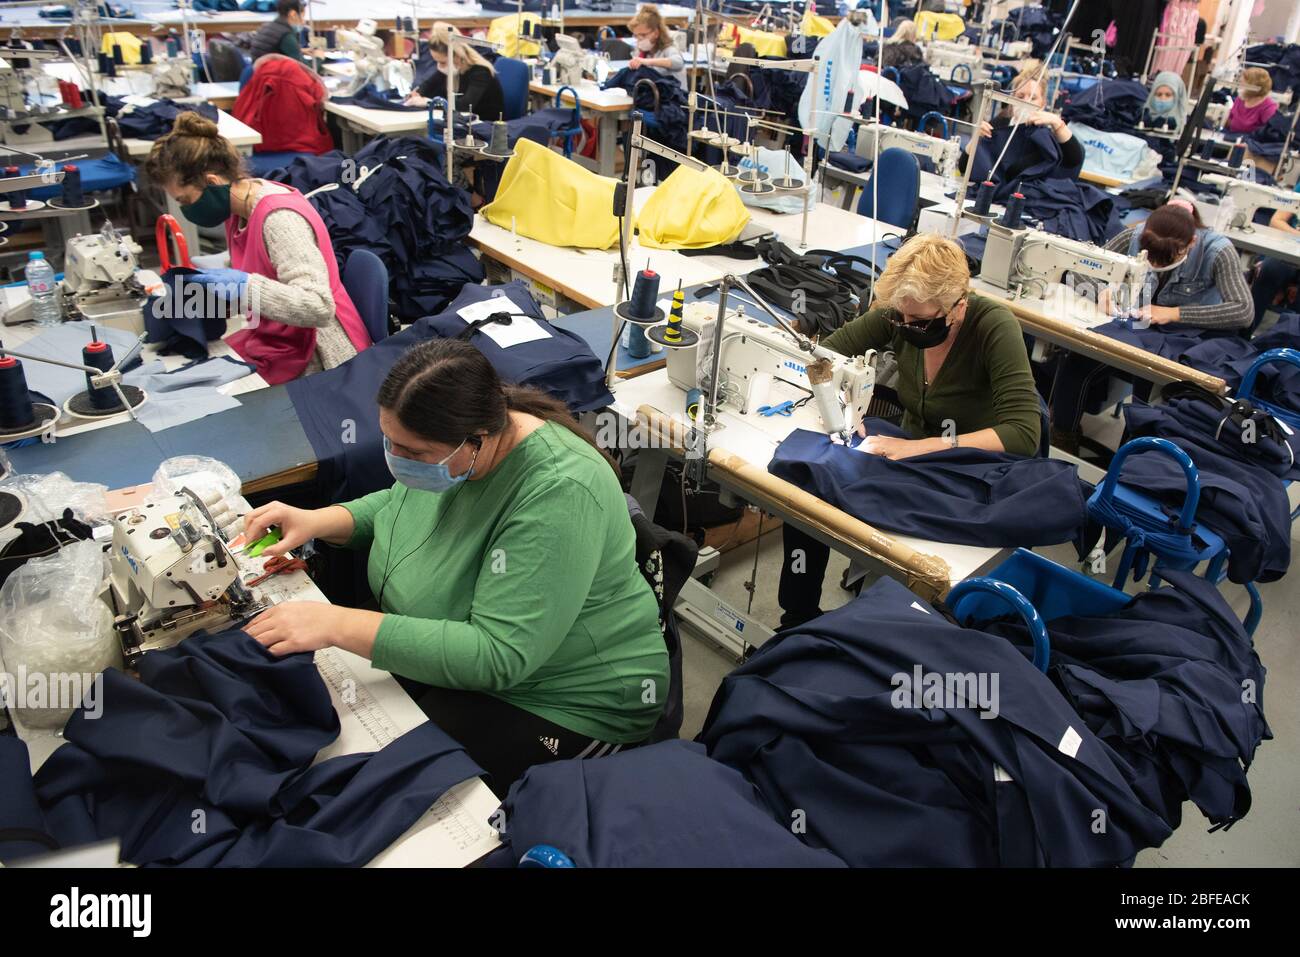 Machinists sew medical clothing for the NHS (National Health Service) at Fashion-Enter Ltd's factory. Stock Photo